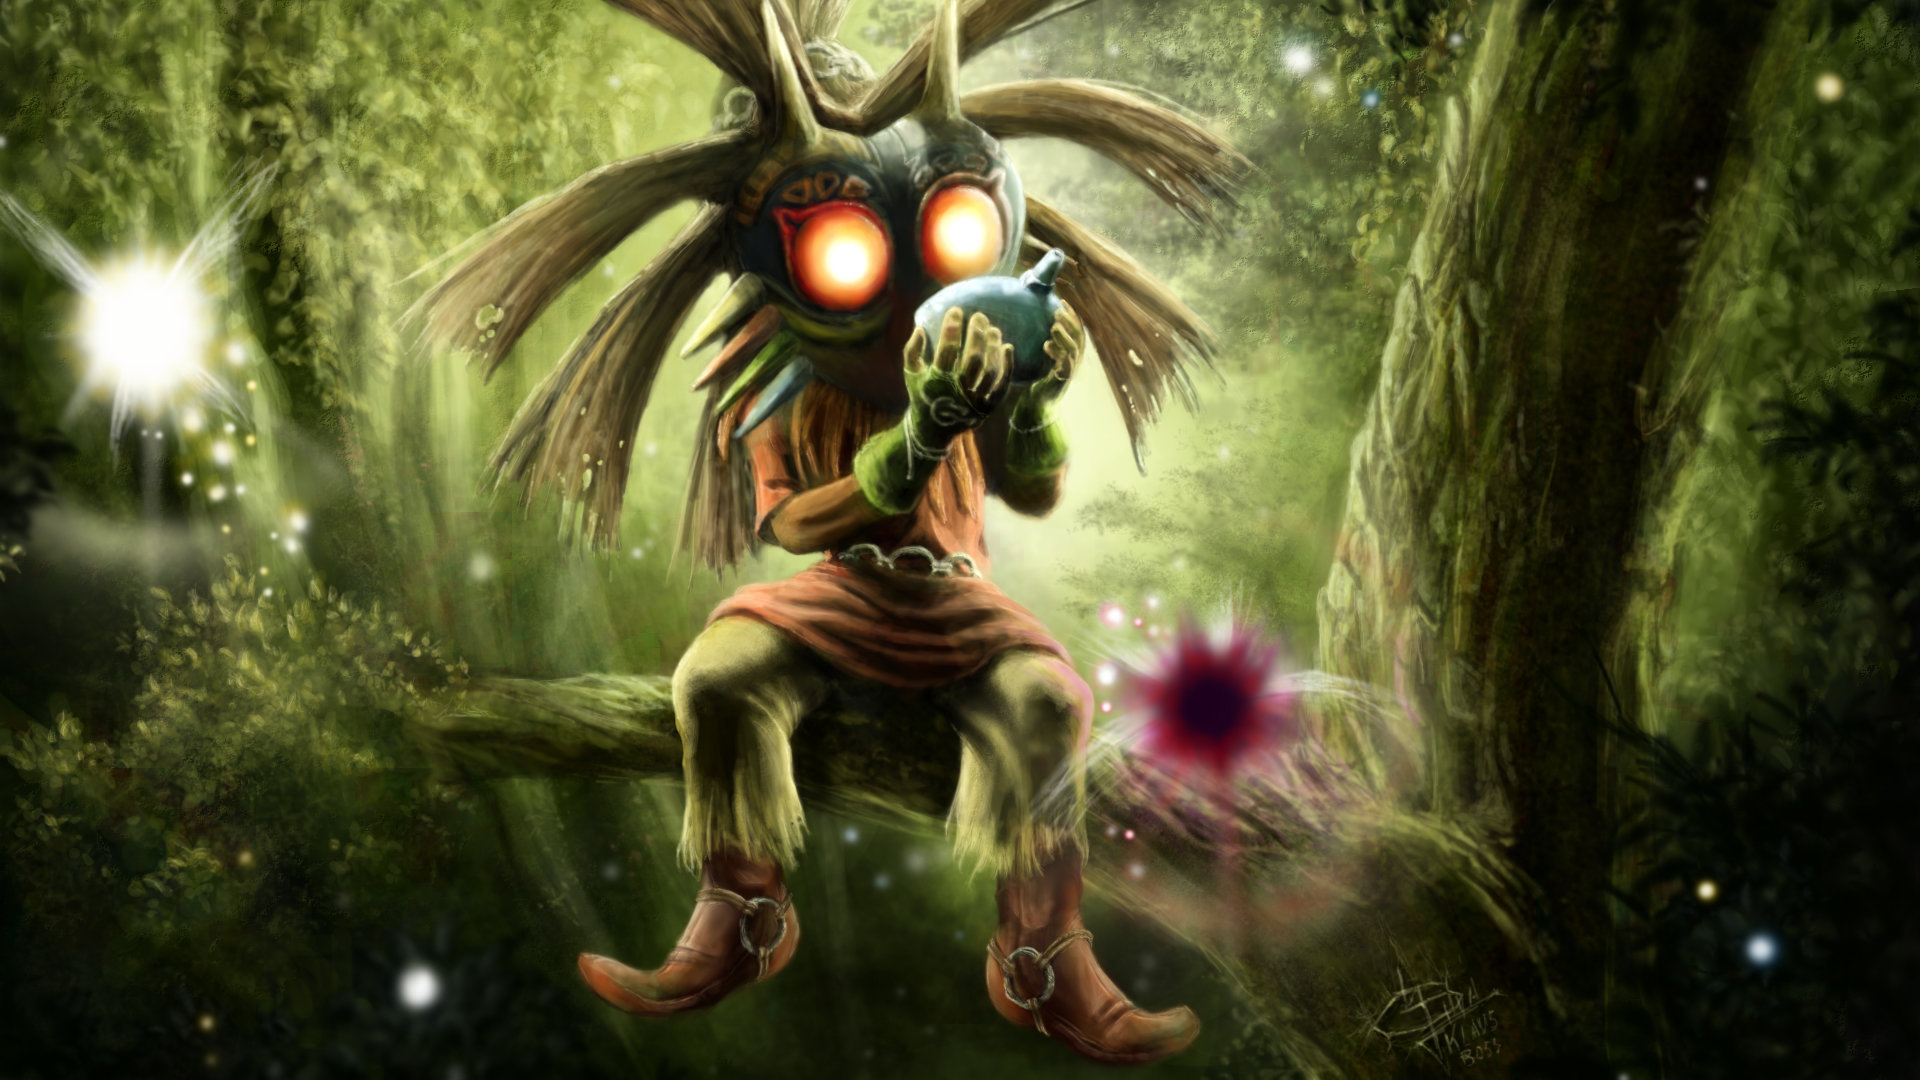 Awesome The Legend Of Zelda: Majora's Mask free wallpaper ID:145443 for full hd 1920x1080 computer